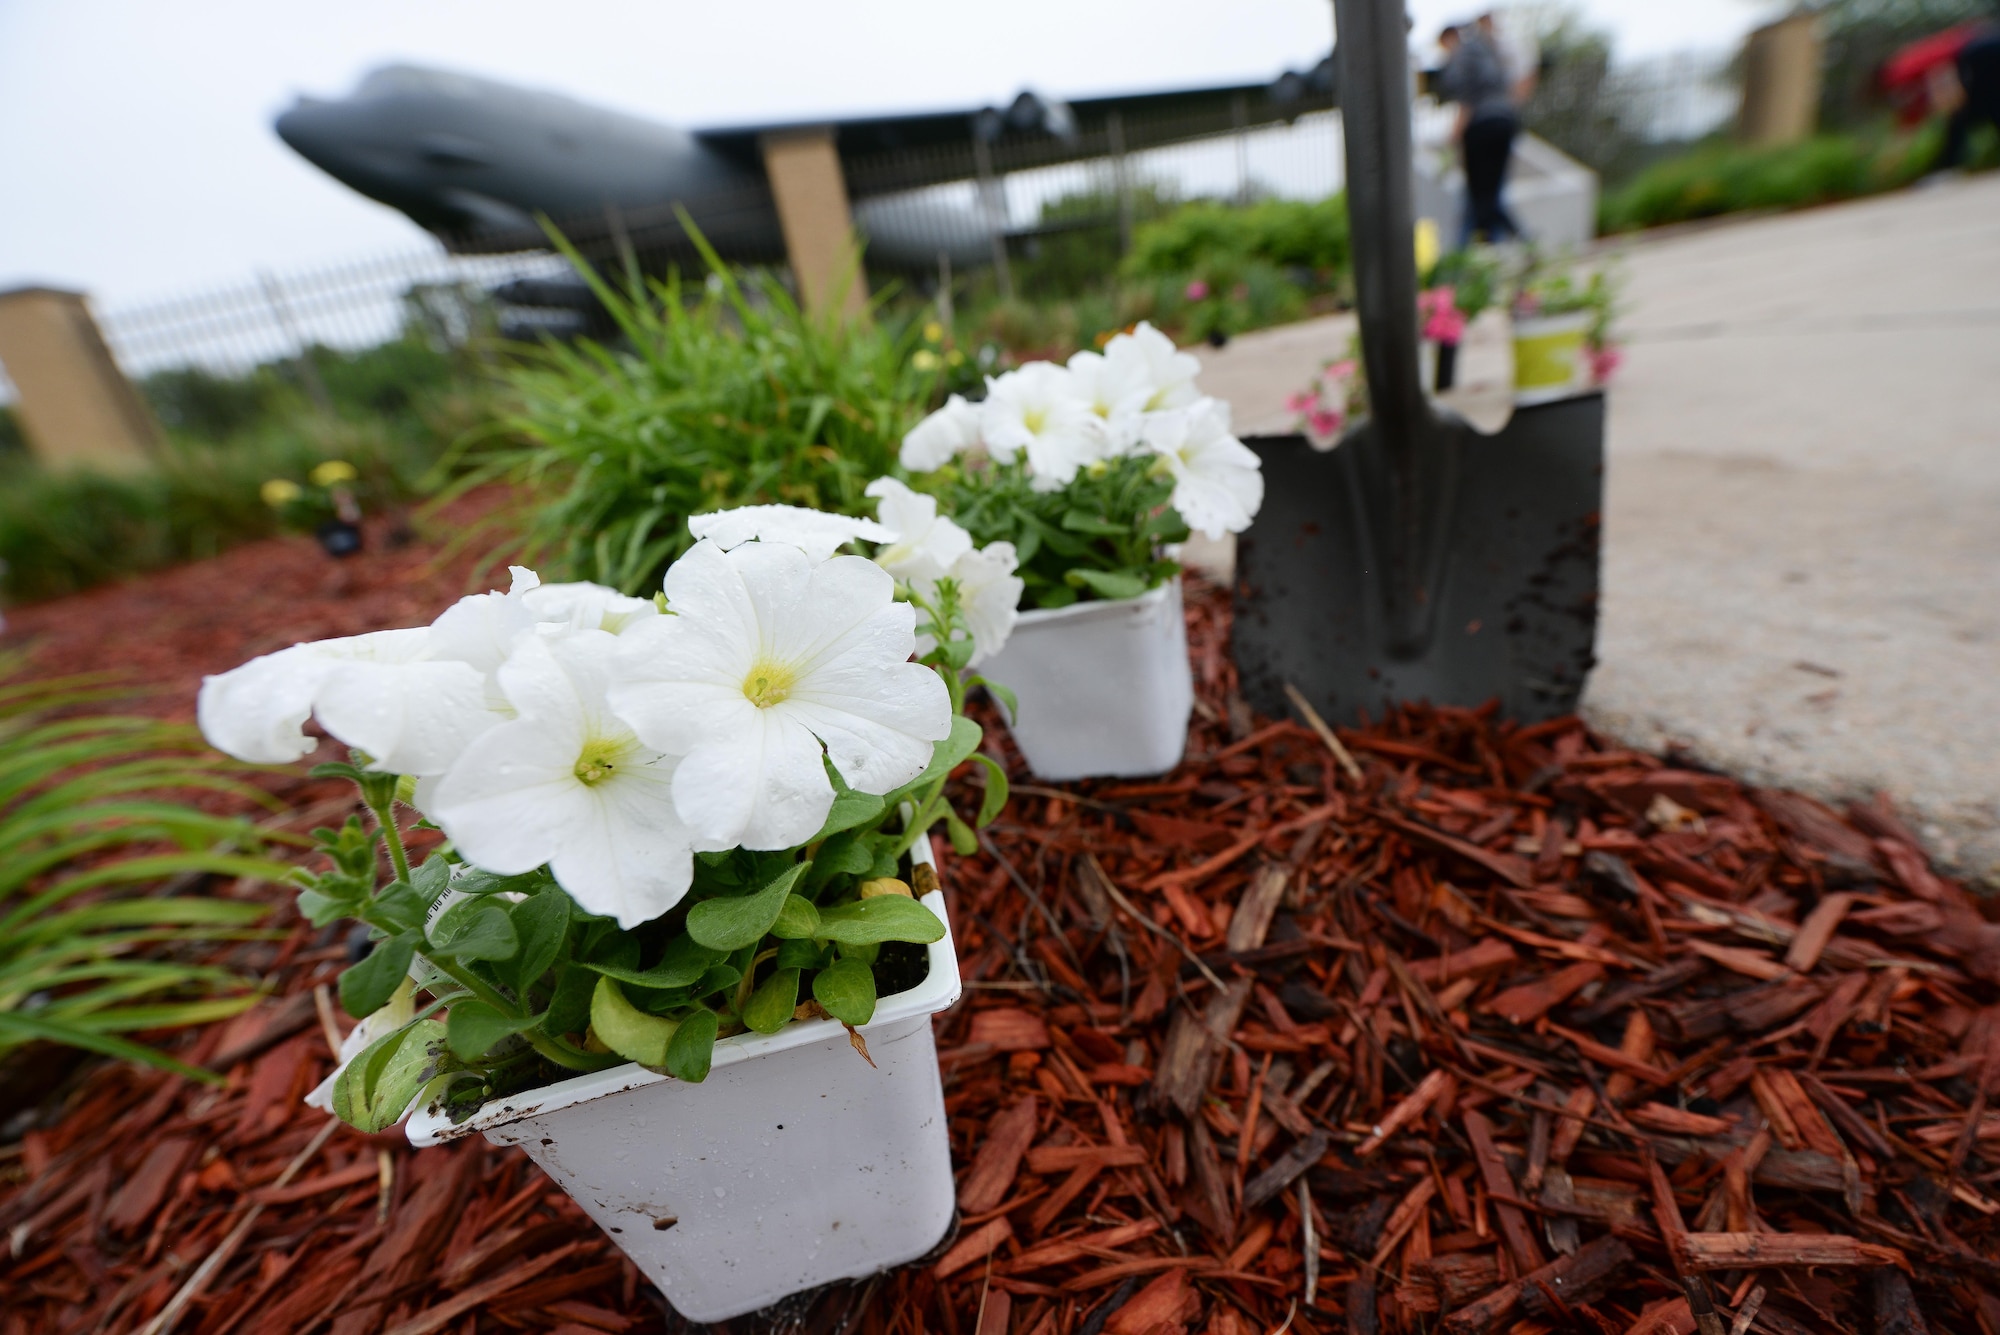 Members of the 55th Security Forces Association plant flowers and lay mulch outside the Kenney Gate at Offutt Air Force Base, Nebraska, May 10, 2017 during a beautification project. Airmen planted flowers, plants, grass seeds and spread mulch to make Offutt AFB look presentable. (U.S. Air Force photo by Zachary Hada)